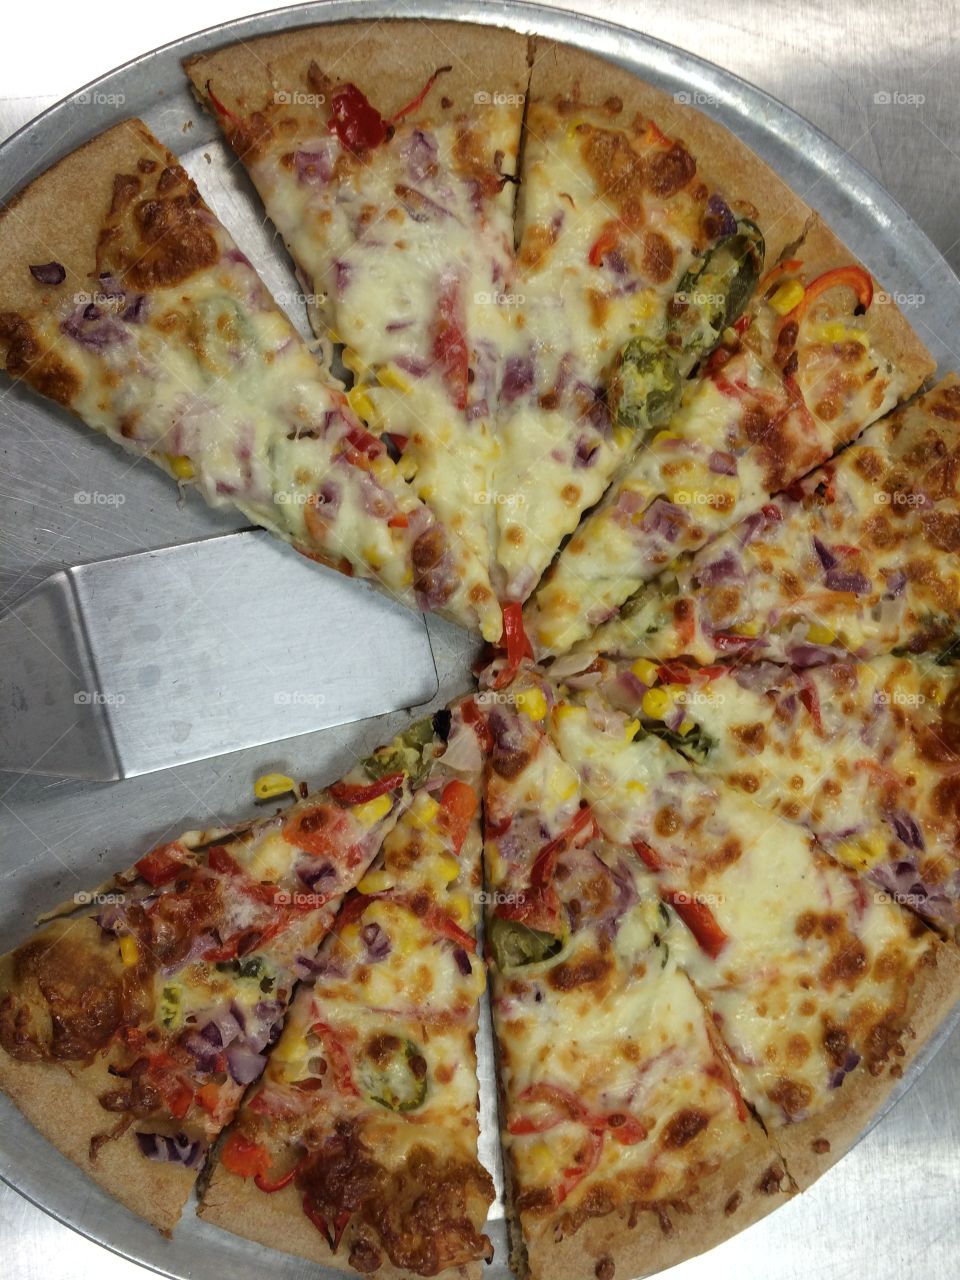 White Sauce, corn, jalopeno, sweet peppers, and onion Vegetable Pizza so yummy. Teacher Pizza of the Day! 